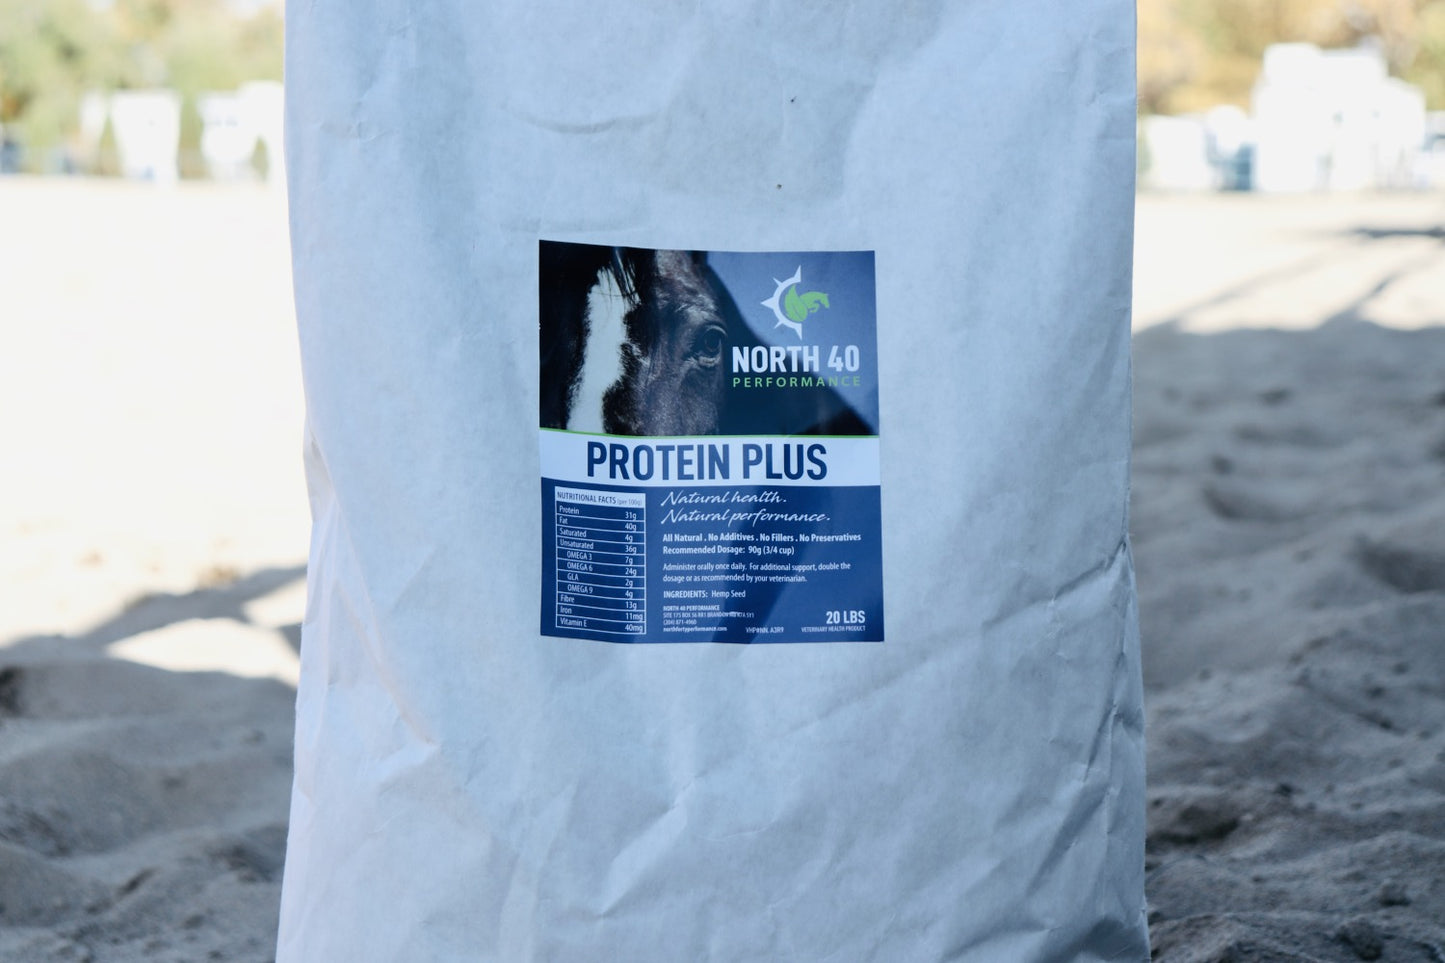 Protein Plus from North 40 Performance is a hemp seed based product